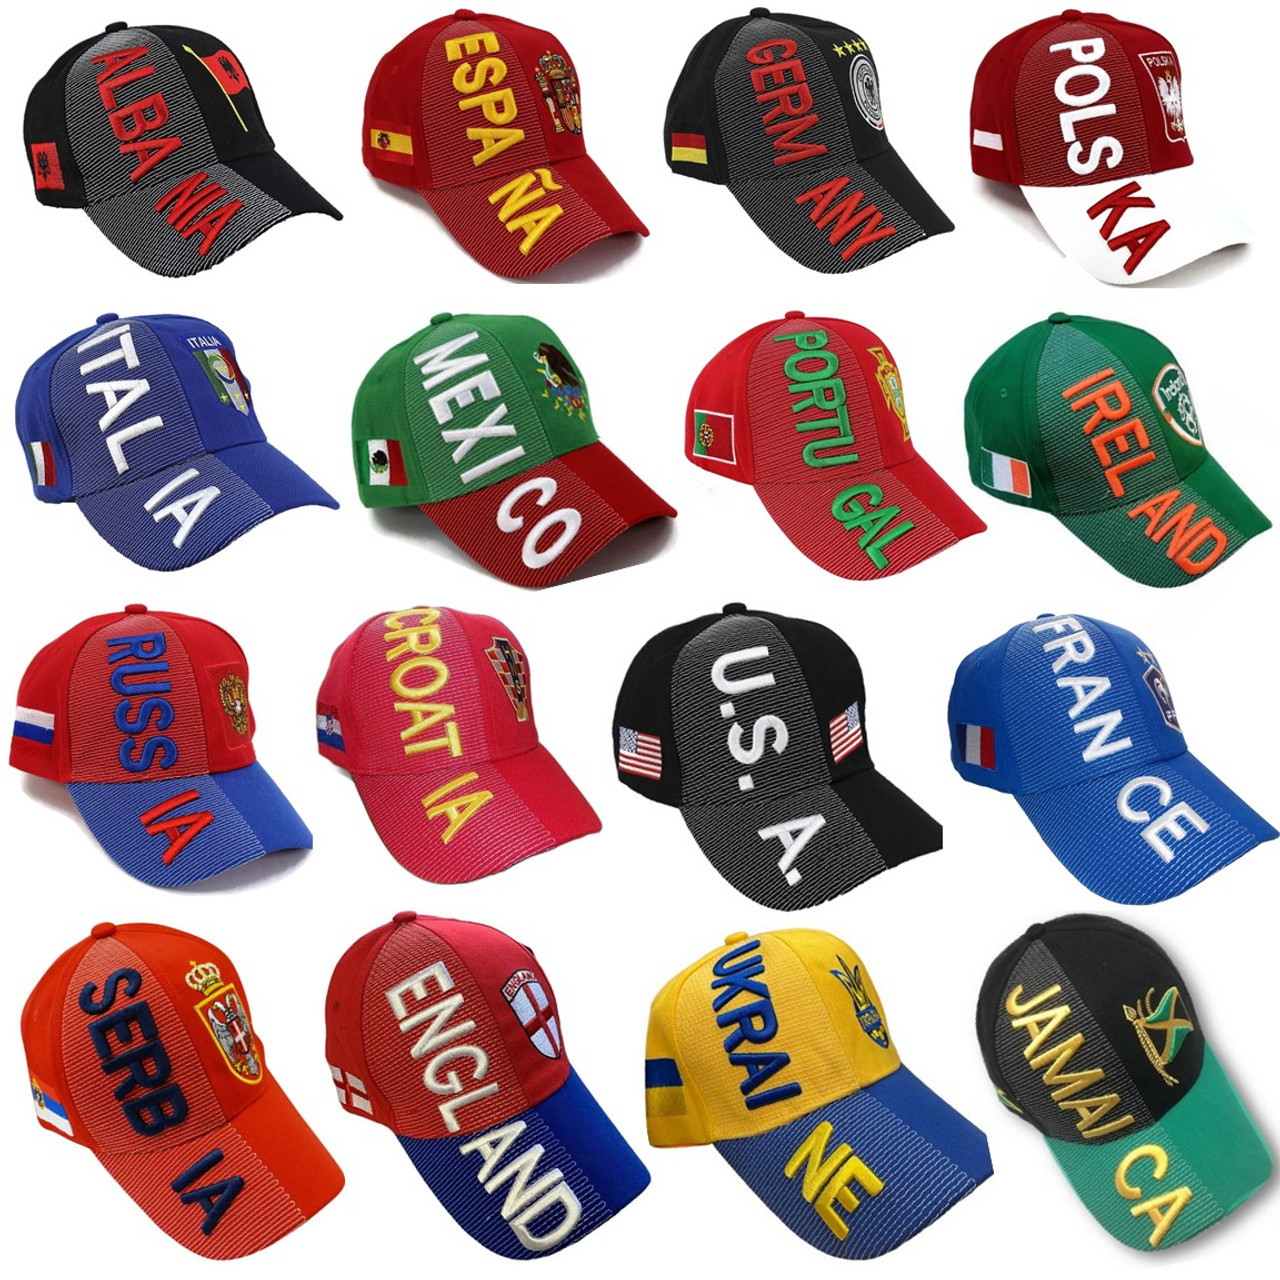 https://cdn11.bigcommerce.com/s-9mnzpxwffi/images/stencil/1280x1280/products/385/3350/0-Mens_Baseball_Caps_With_Country_Name_Embroidery__68760.1702448960.jpg?c=2